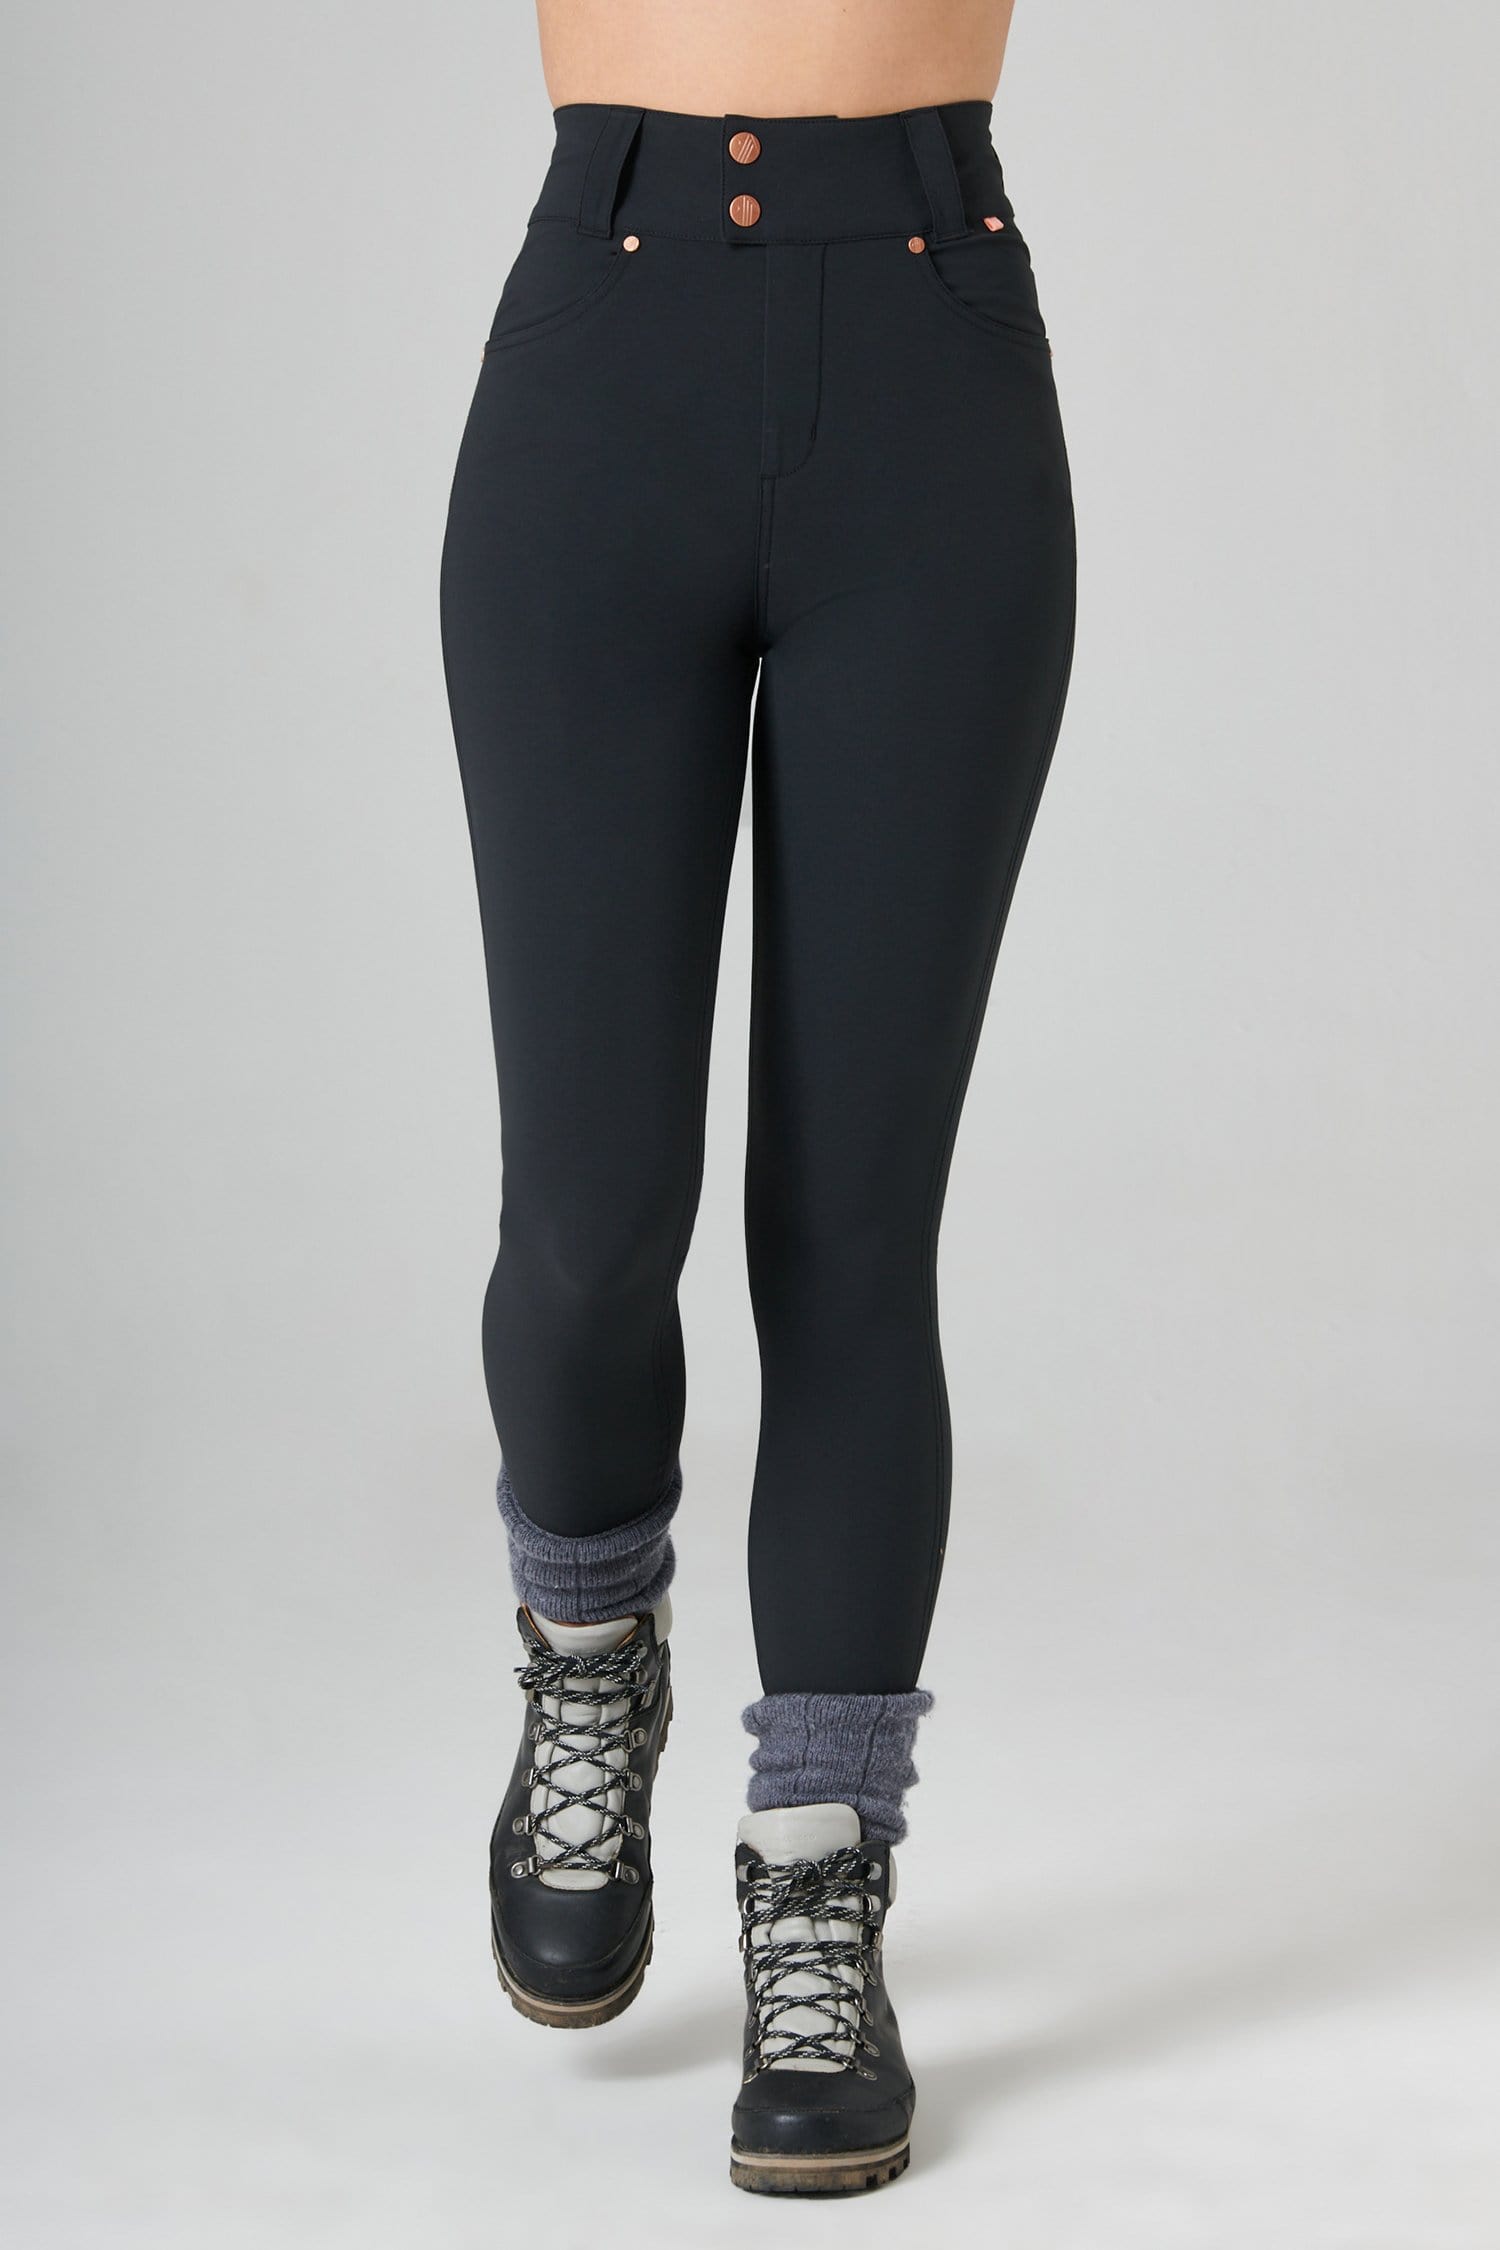 The Shape Skinny Outdoor Trousers - Black - 32r / Uk14 - Womens - Acai Outdoorwear